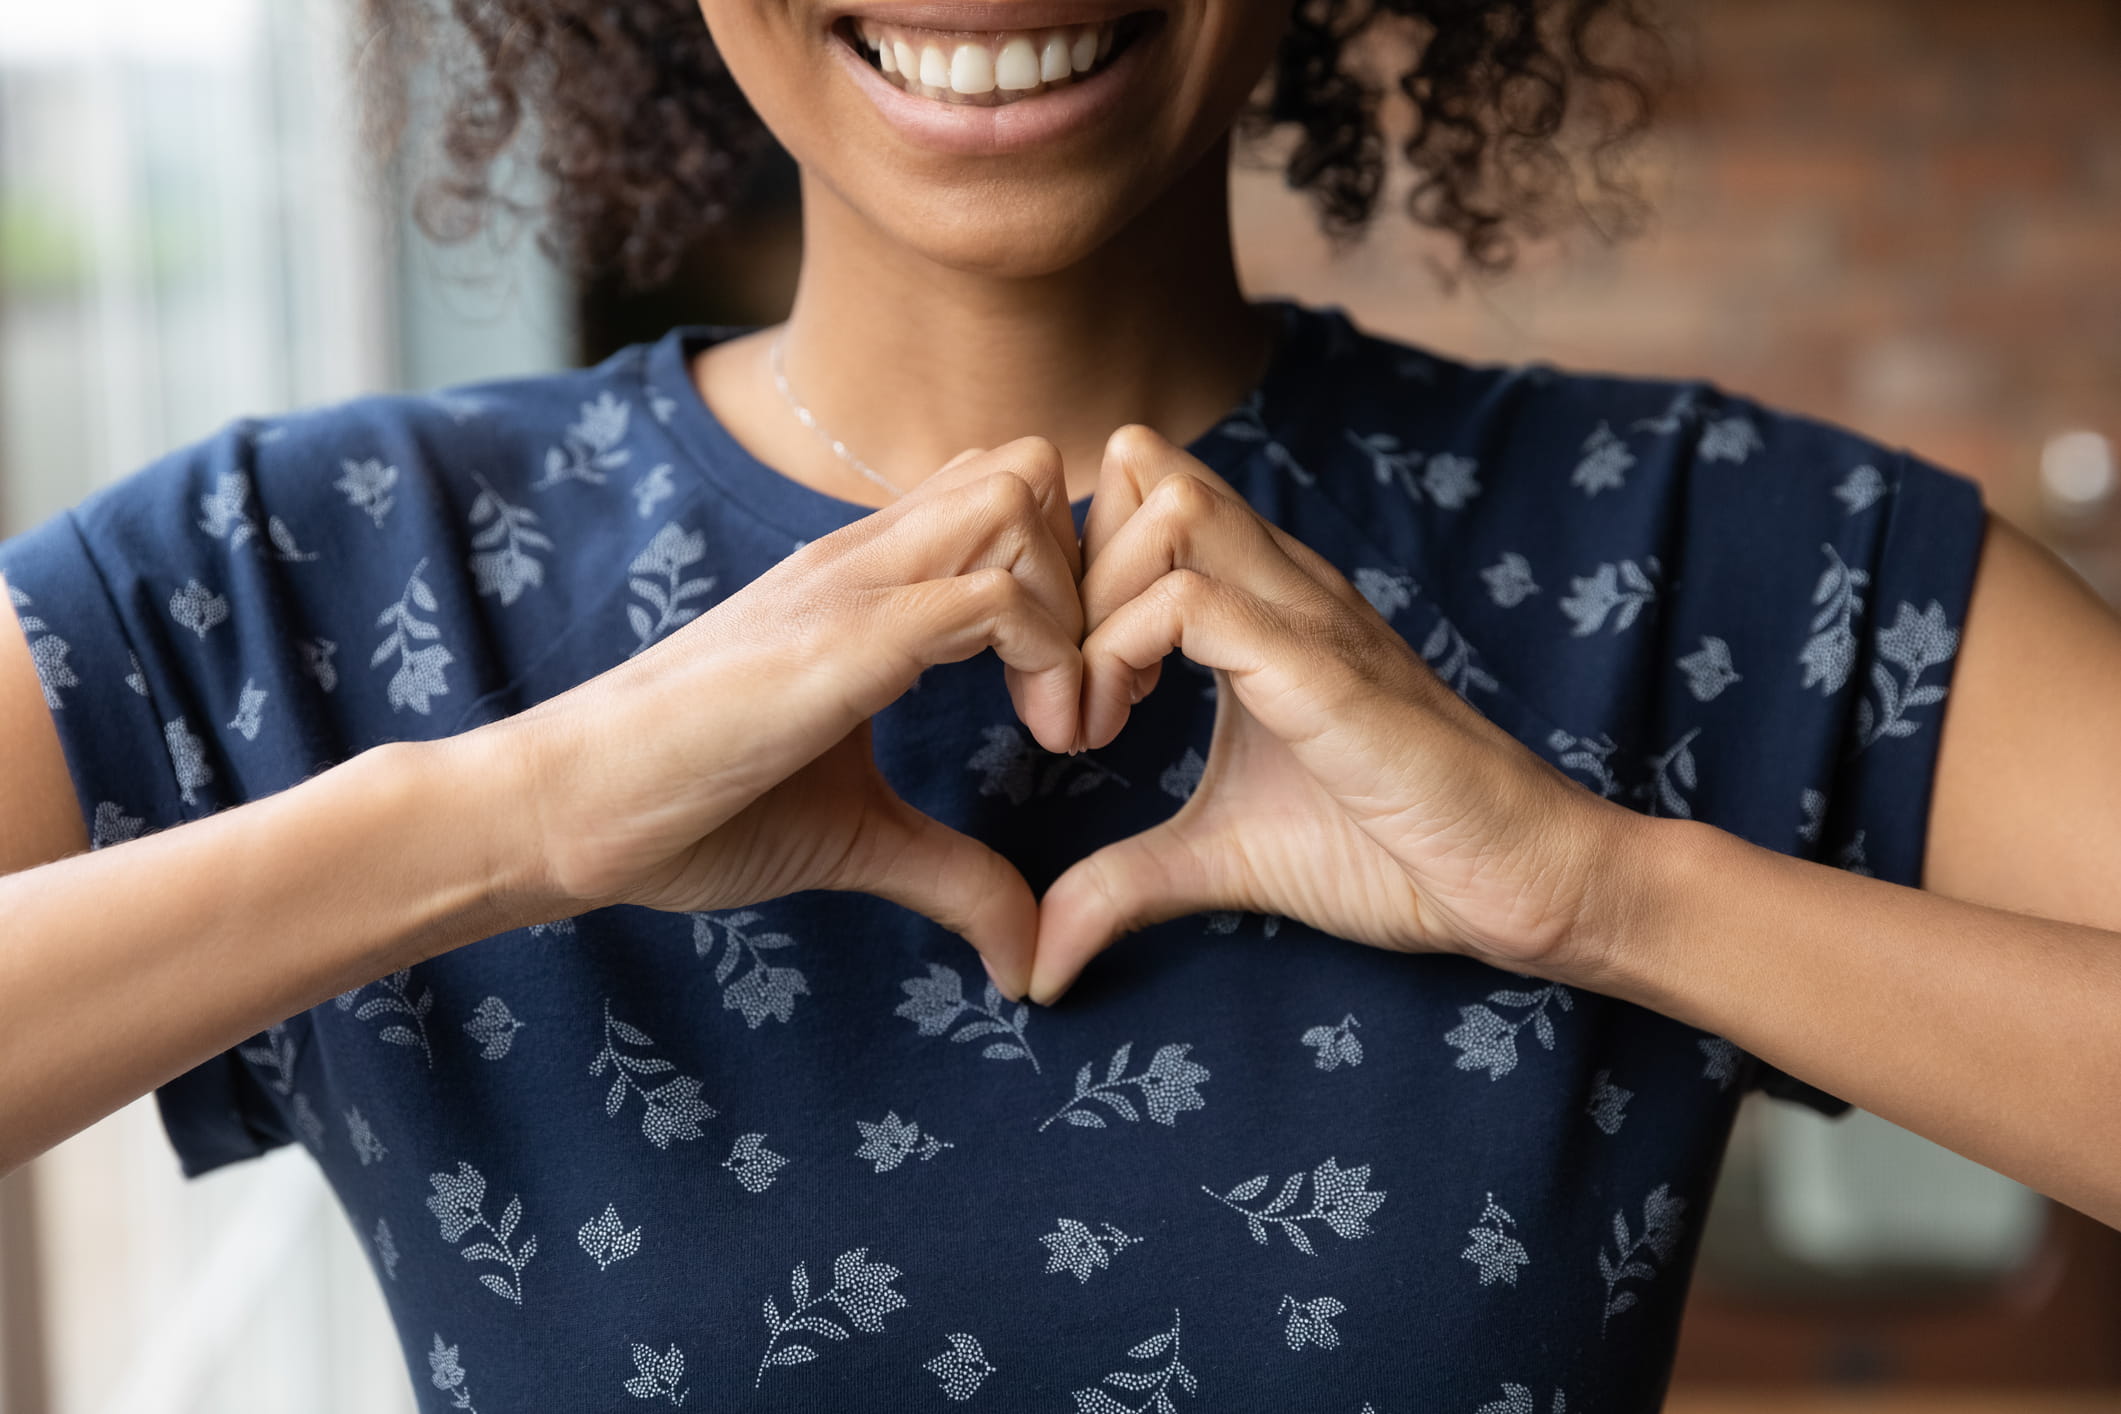 Smiling woman show heart hand gesture